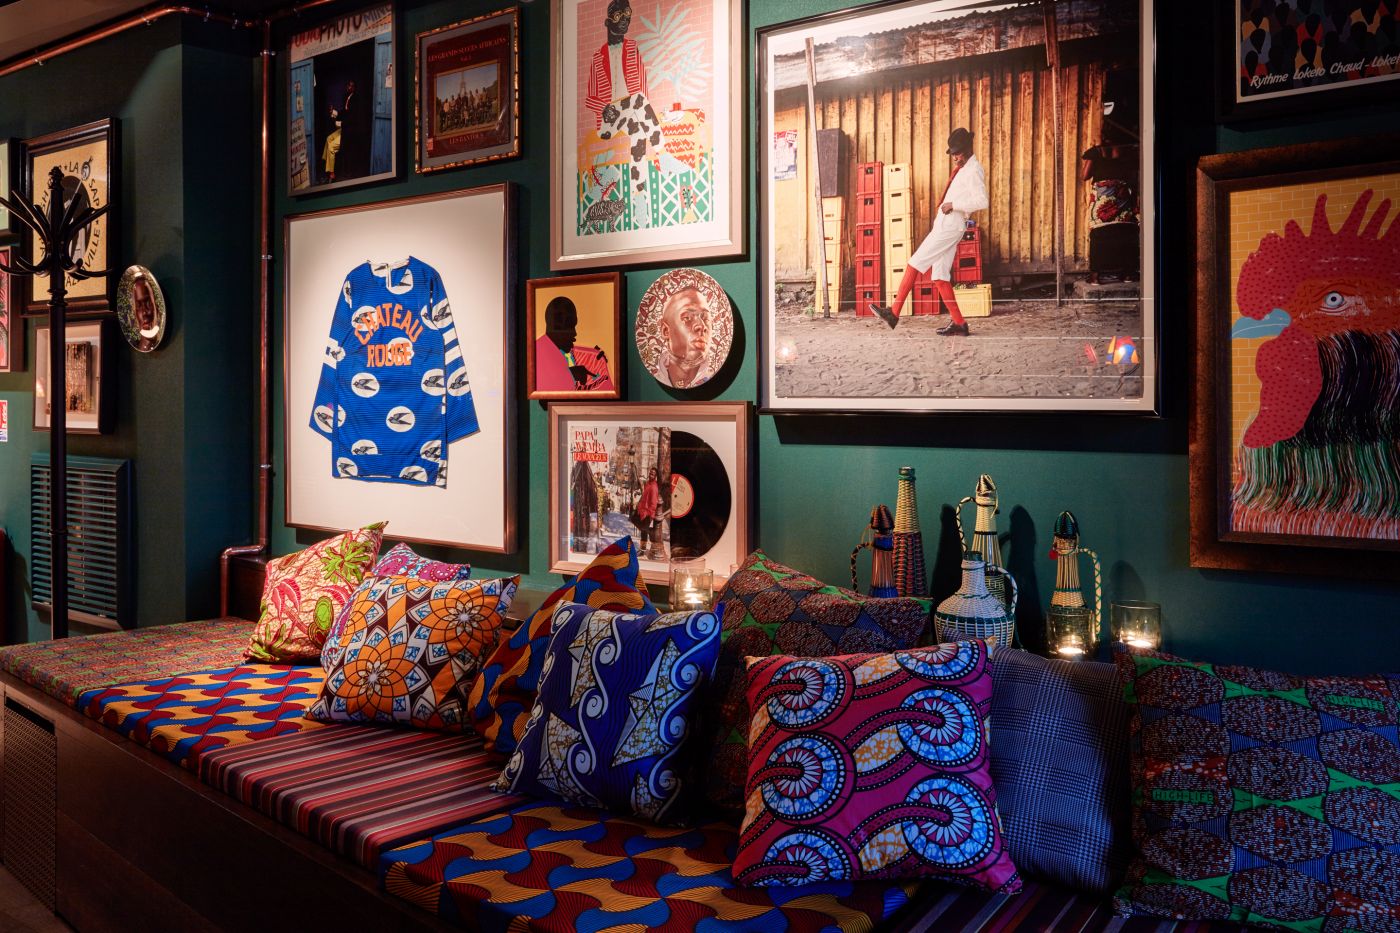 A wooden bench with colourful patterned cushions and pillows, the wall is filled with different artworks